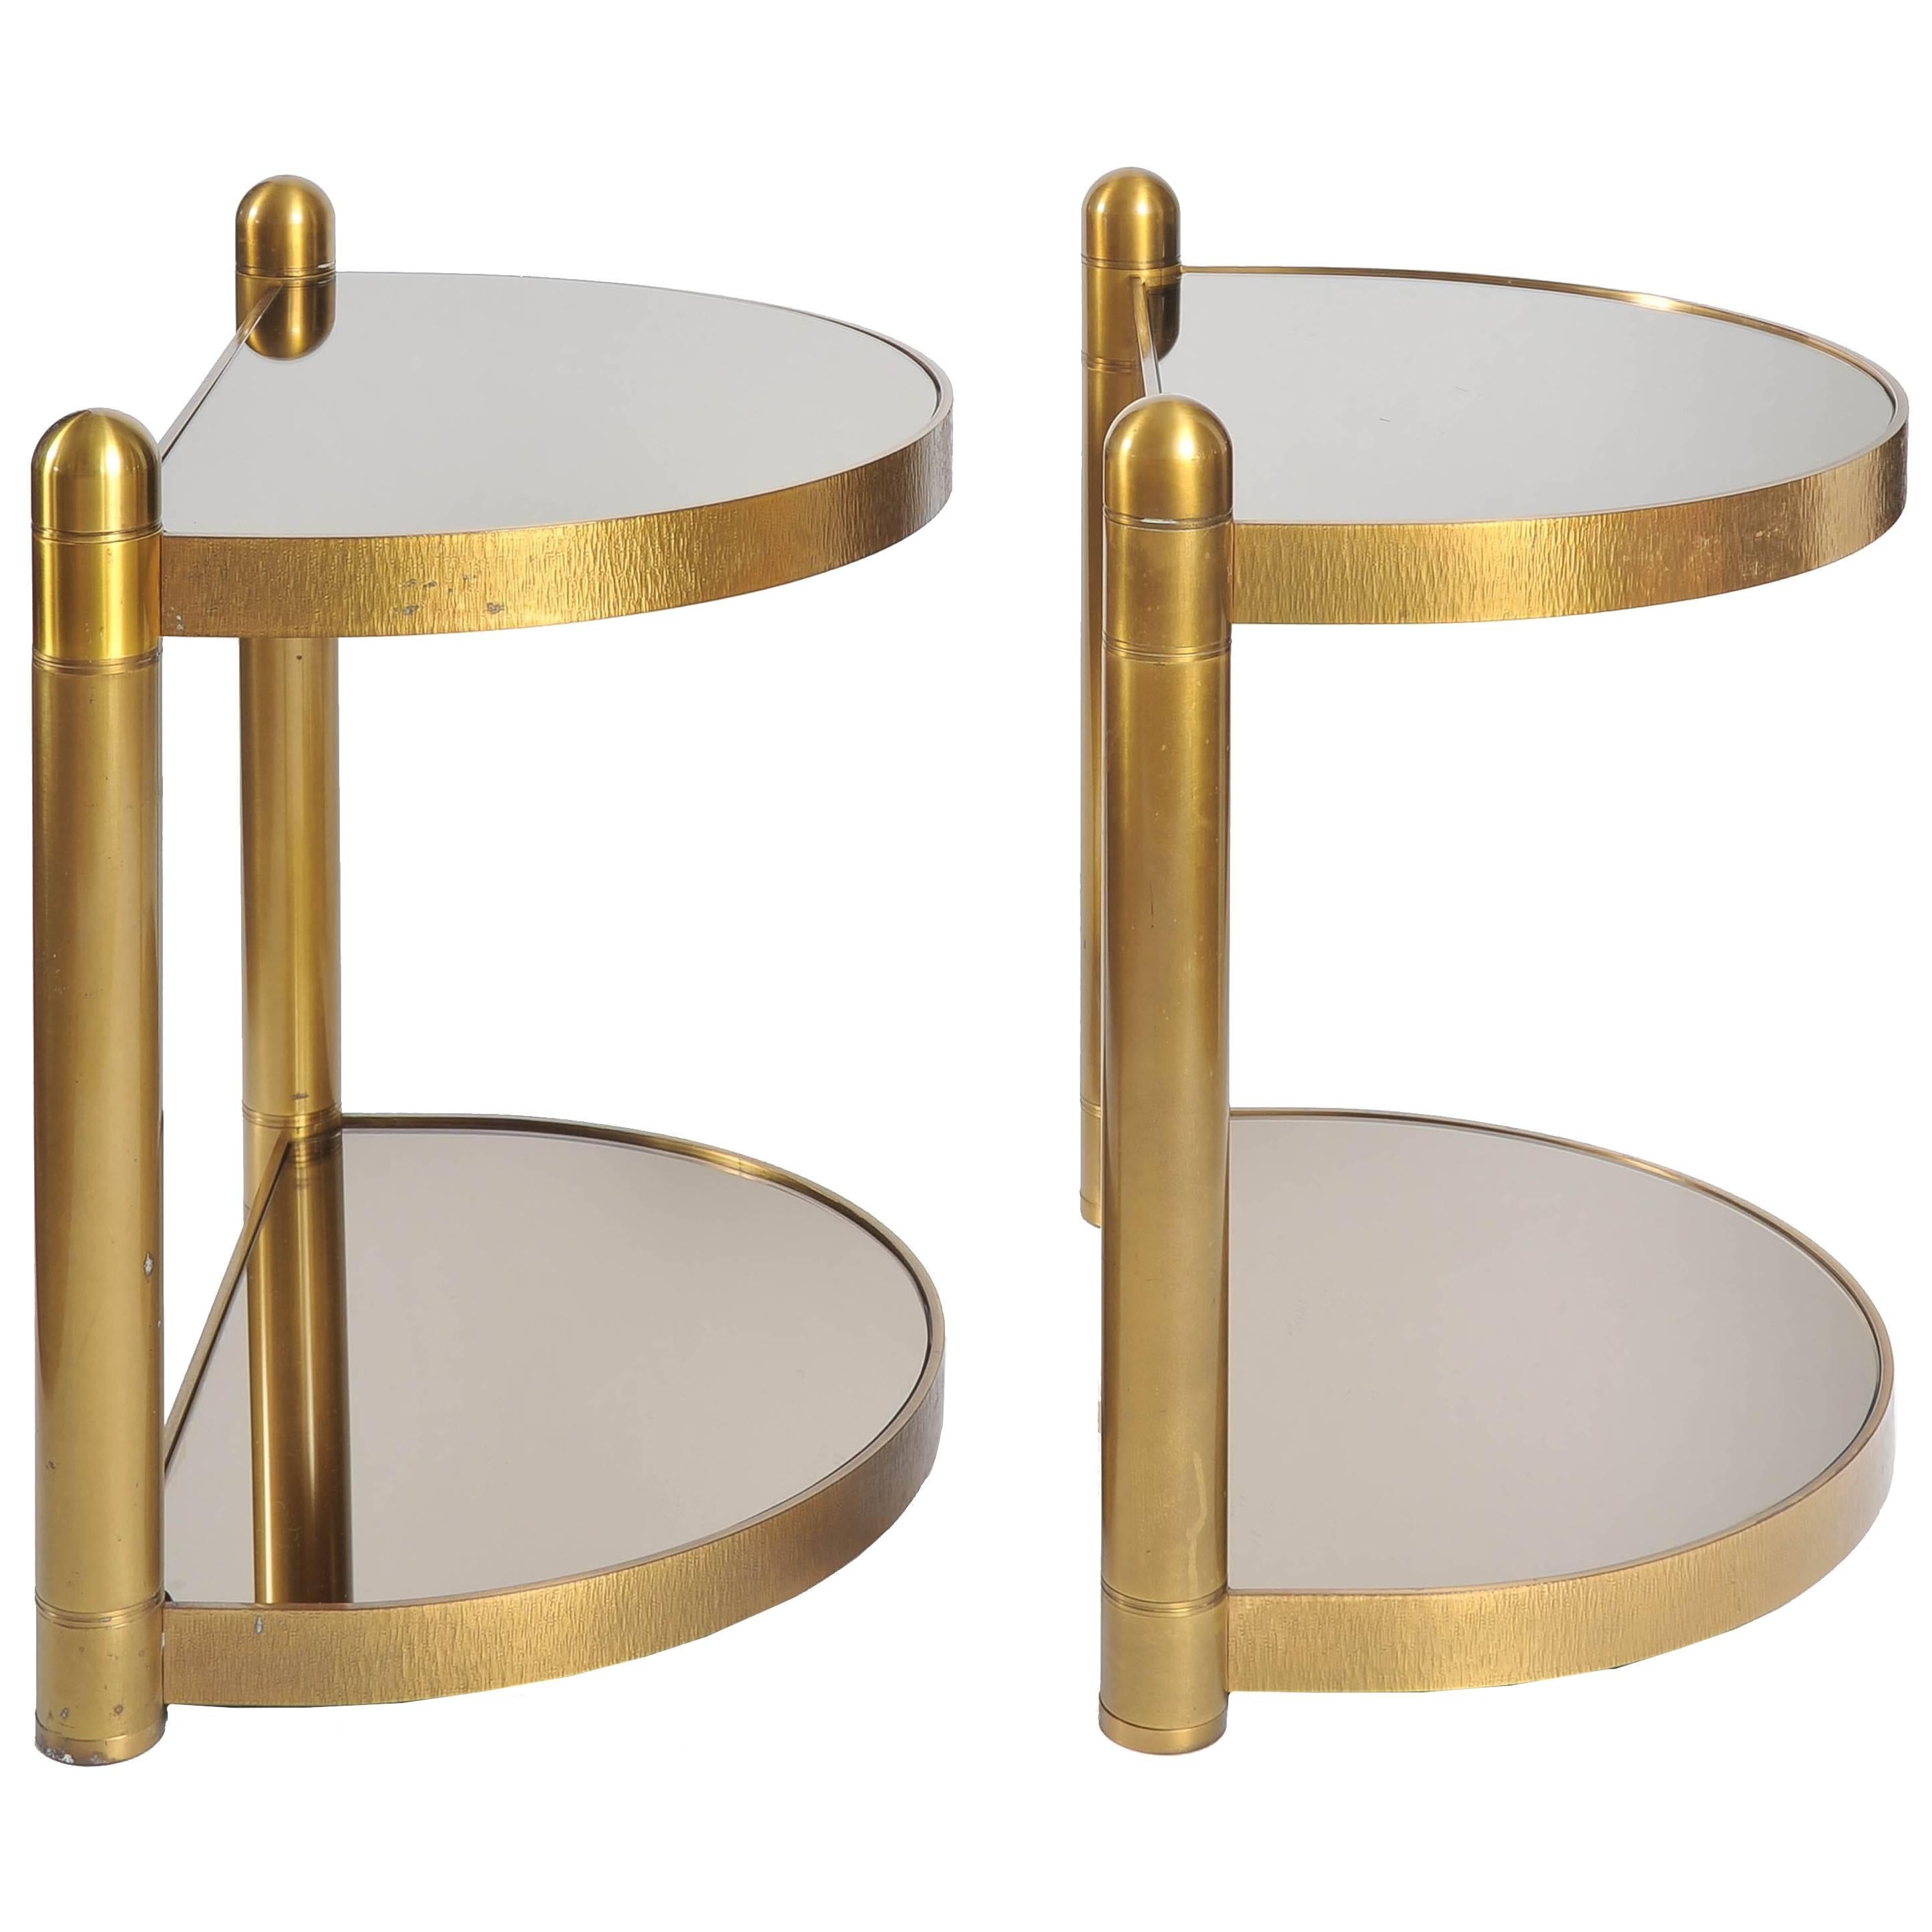 Brass framed side tables each with two 'half moon' smoked mirror shelves.